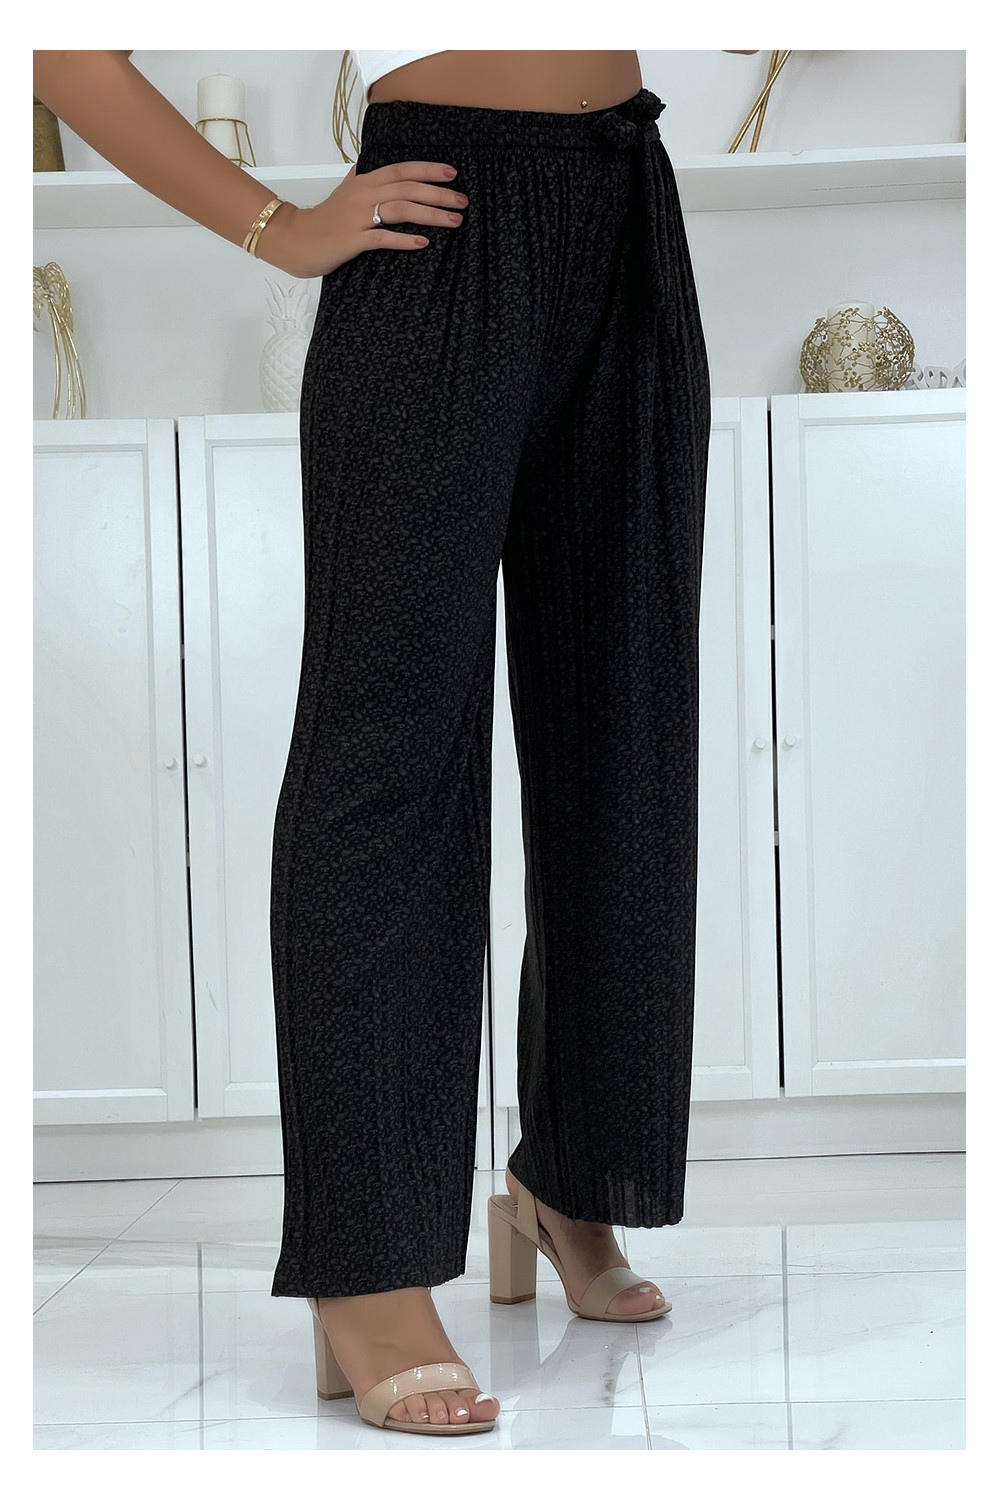 Black pleated palazzo pants with pretty pattern